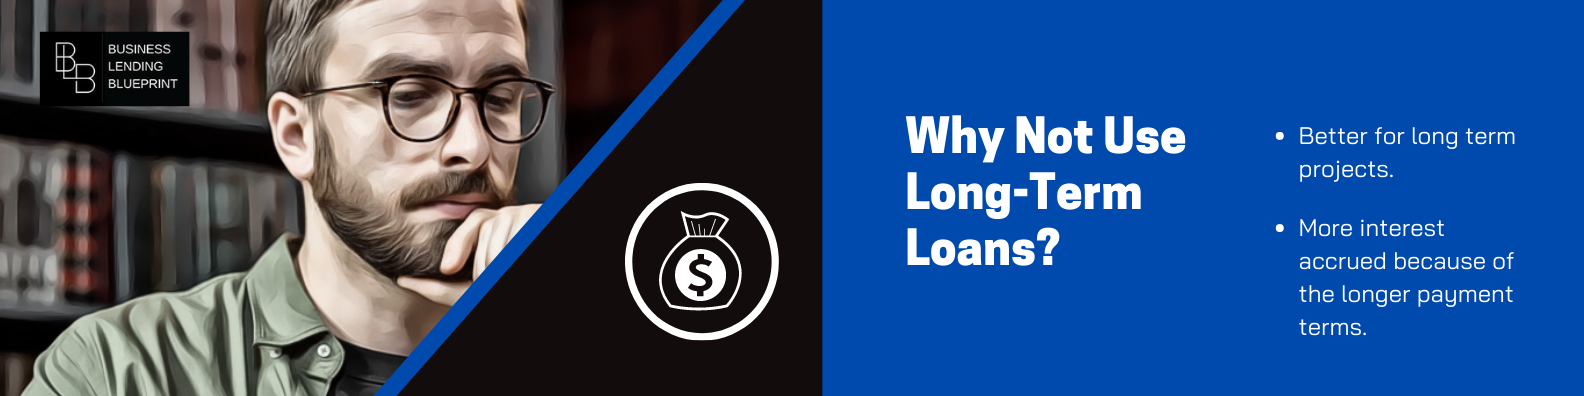 Why Not Use Long-Term Loans graphic